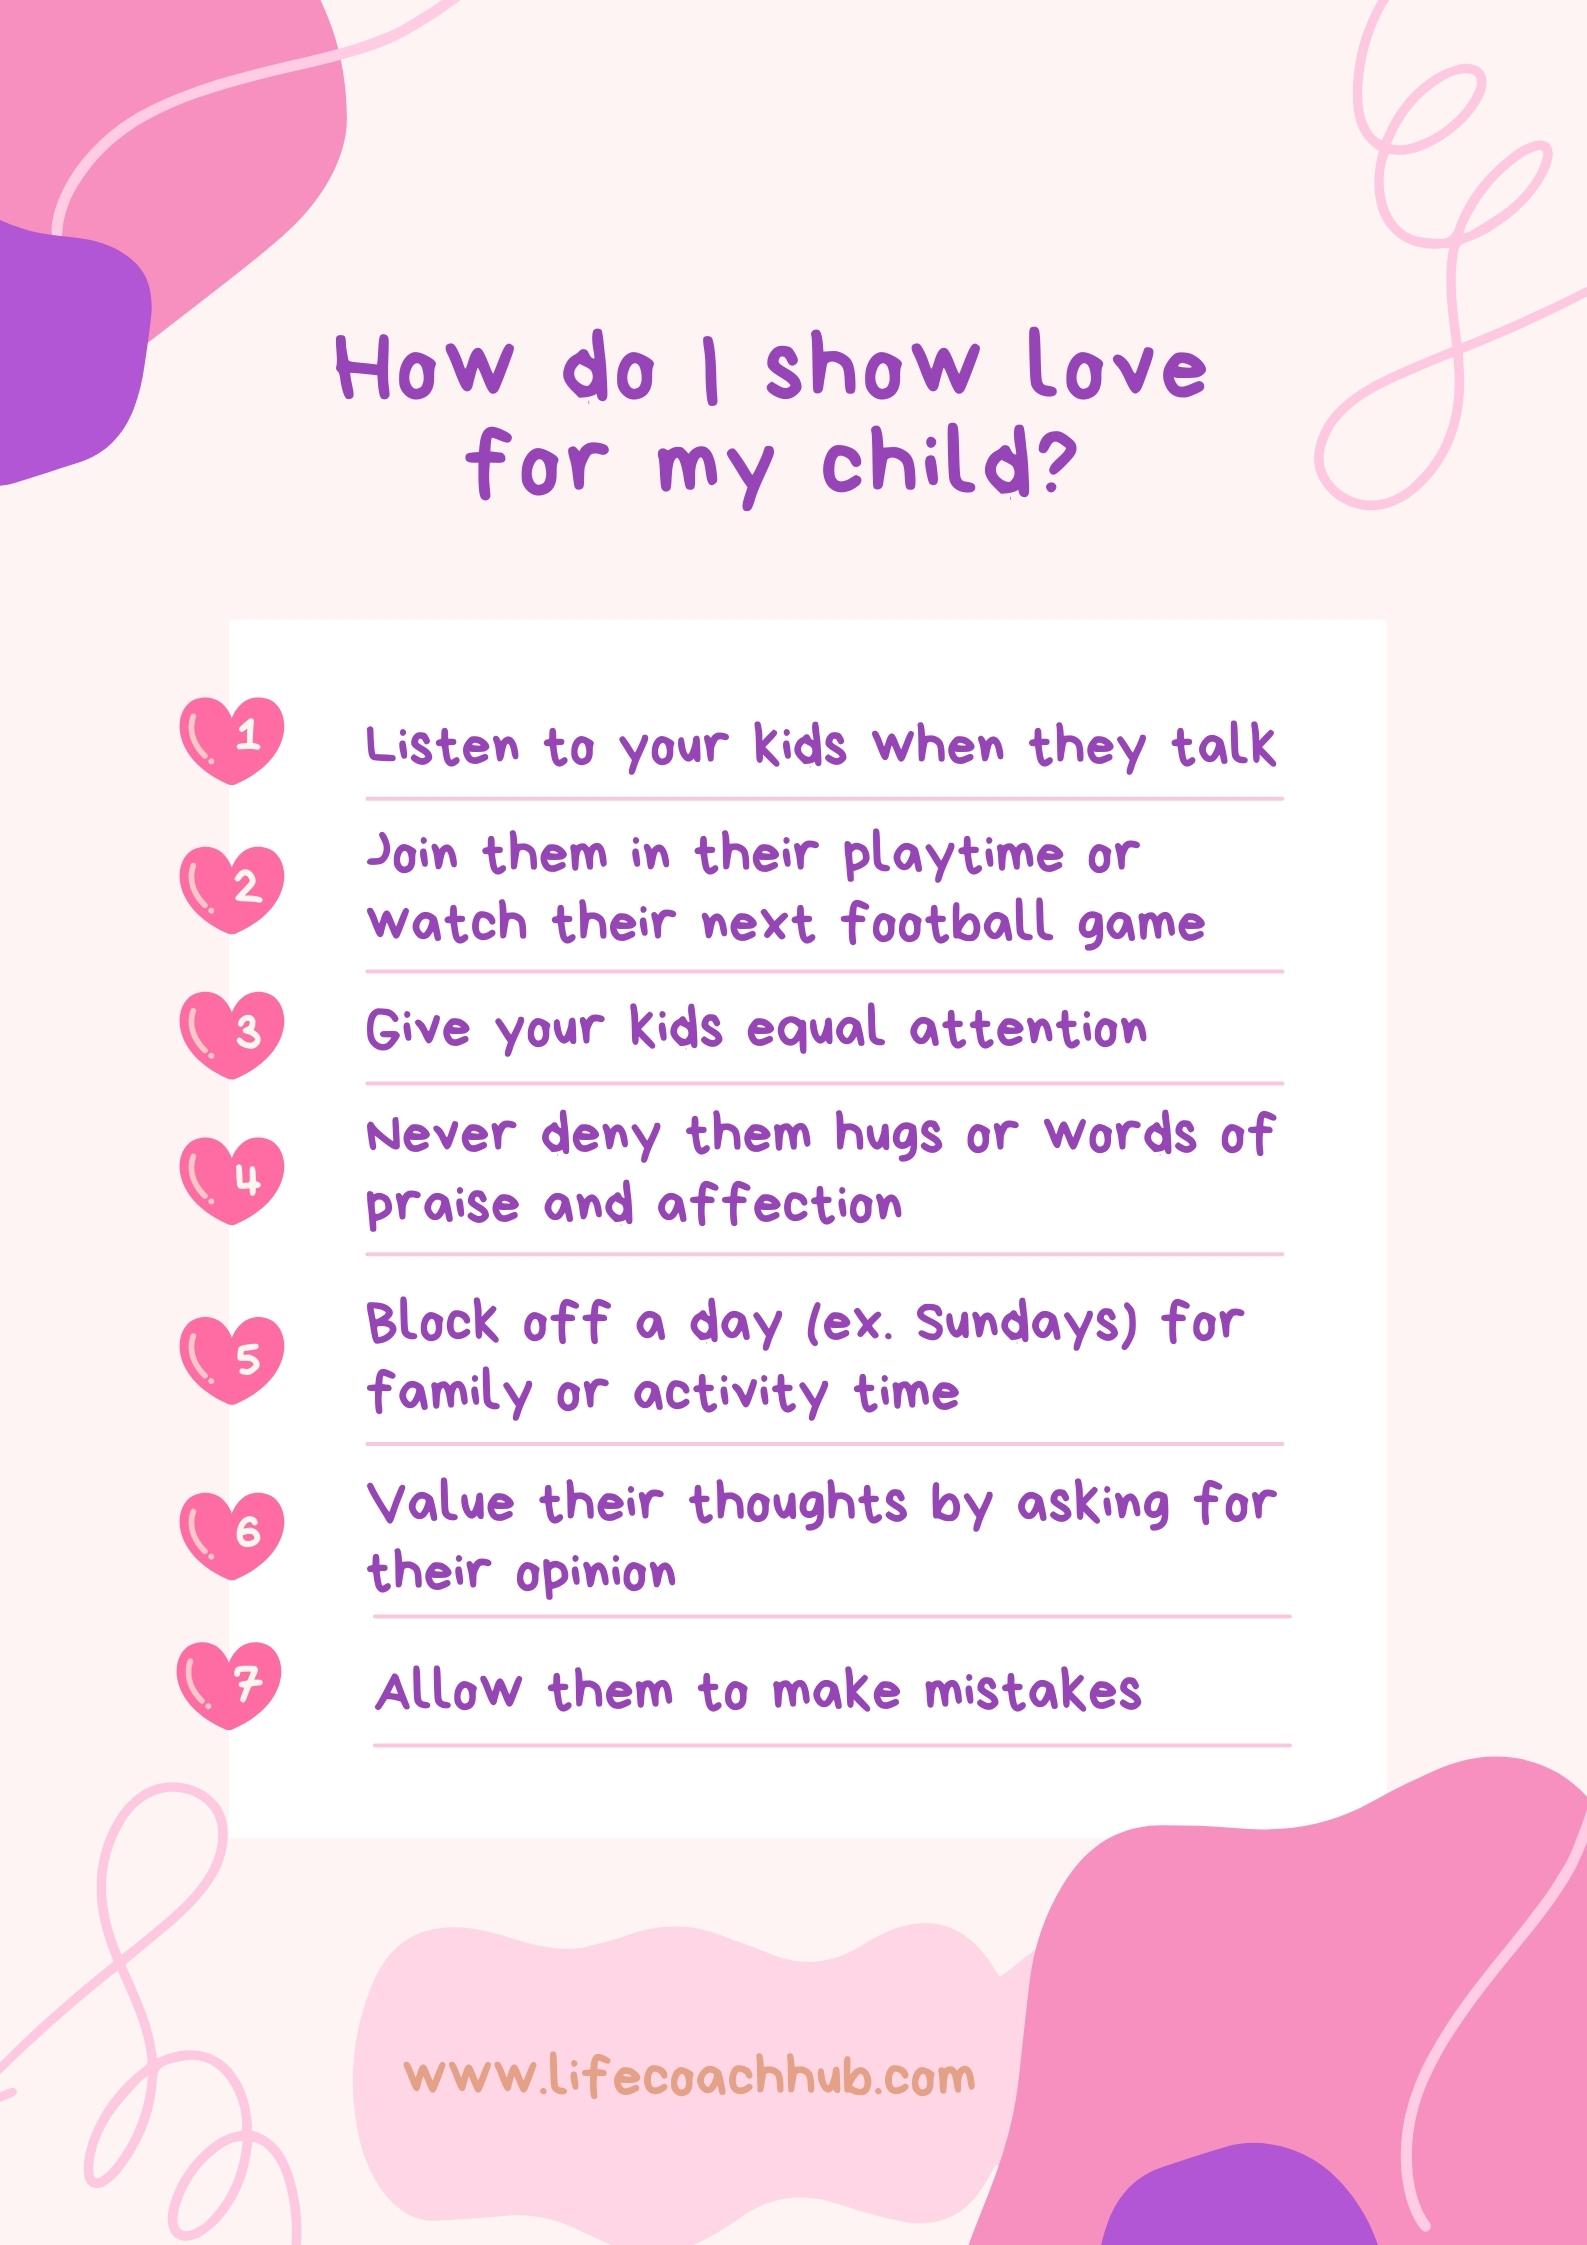 How to show love for your child